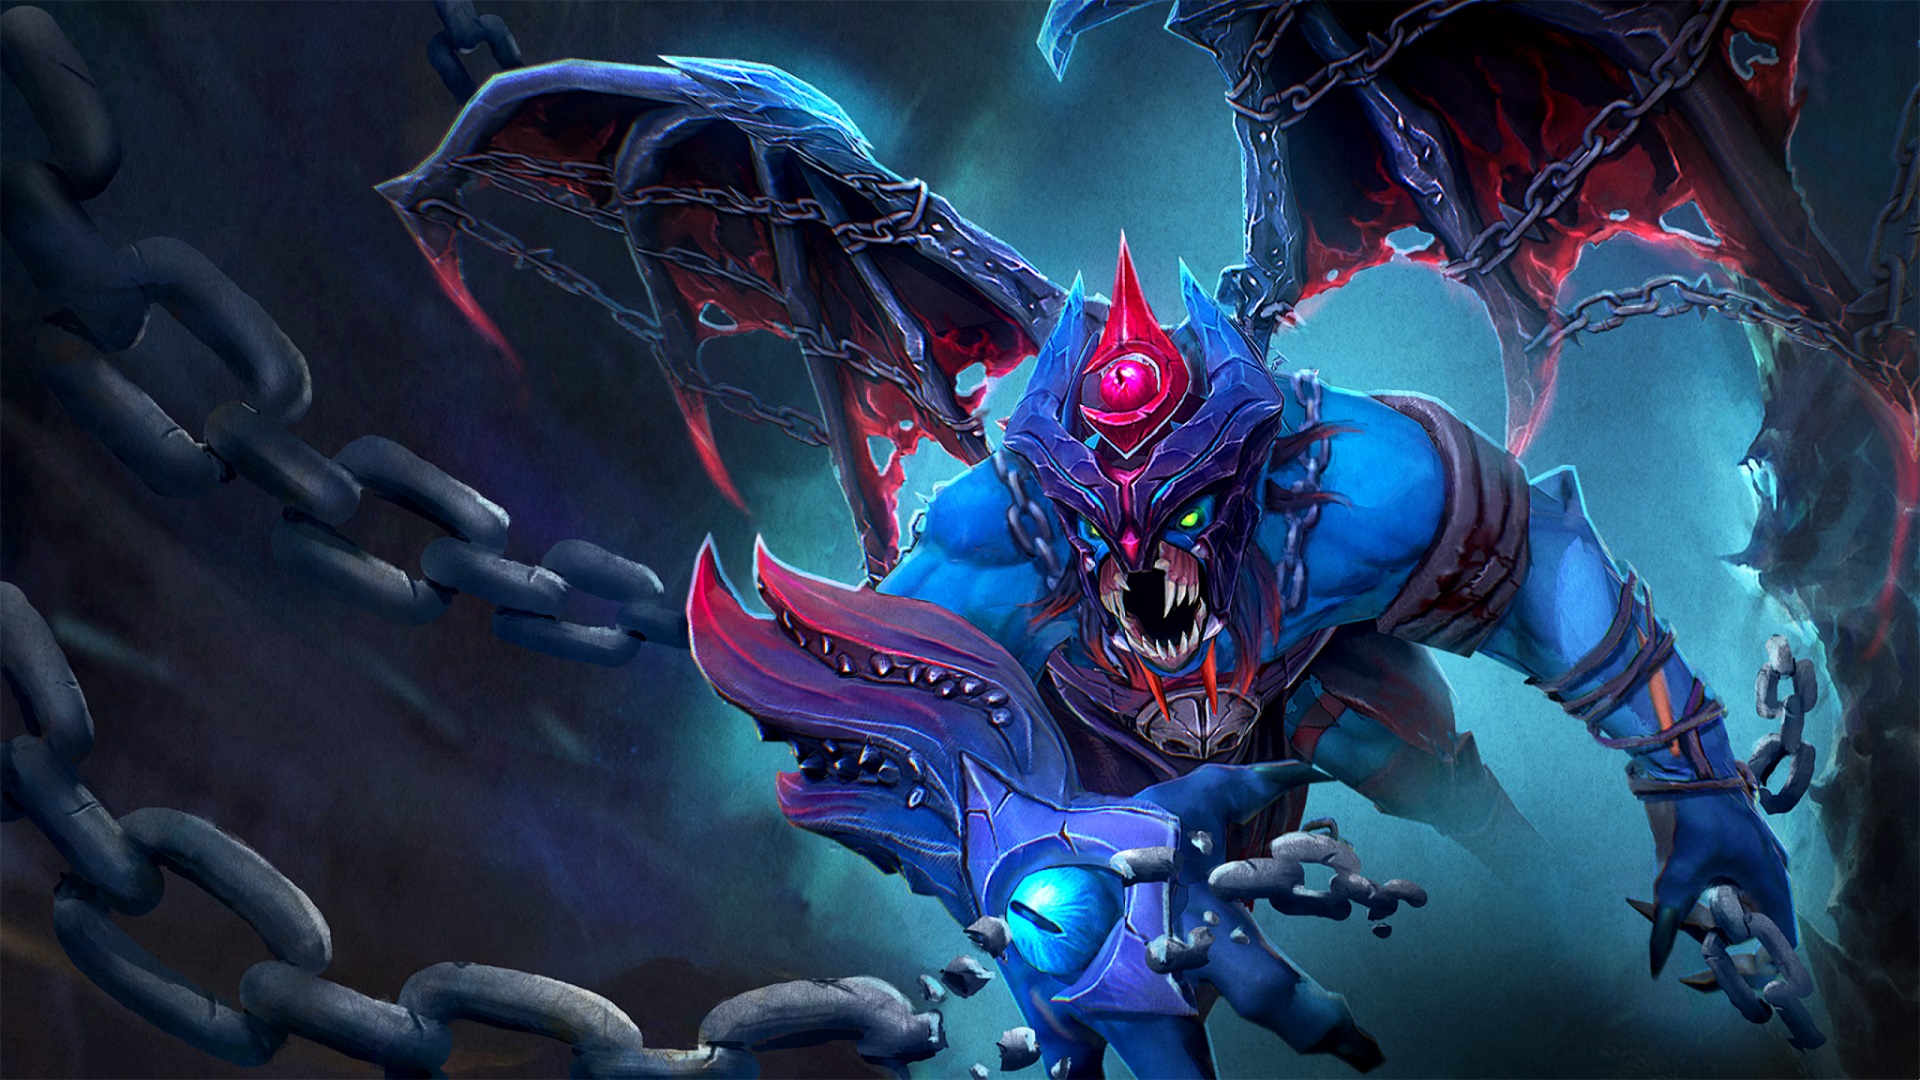 Night Stalker and Io take significant win rate hits after ...